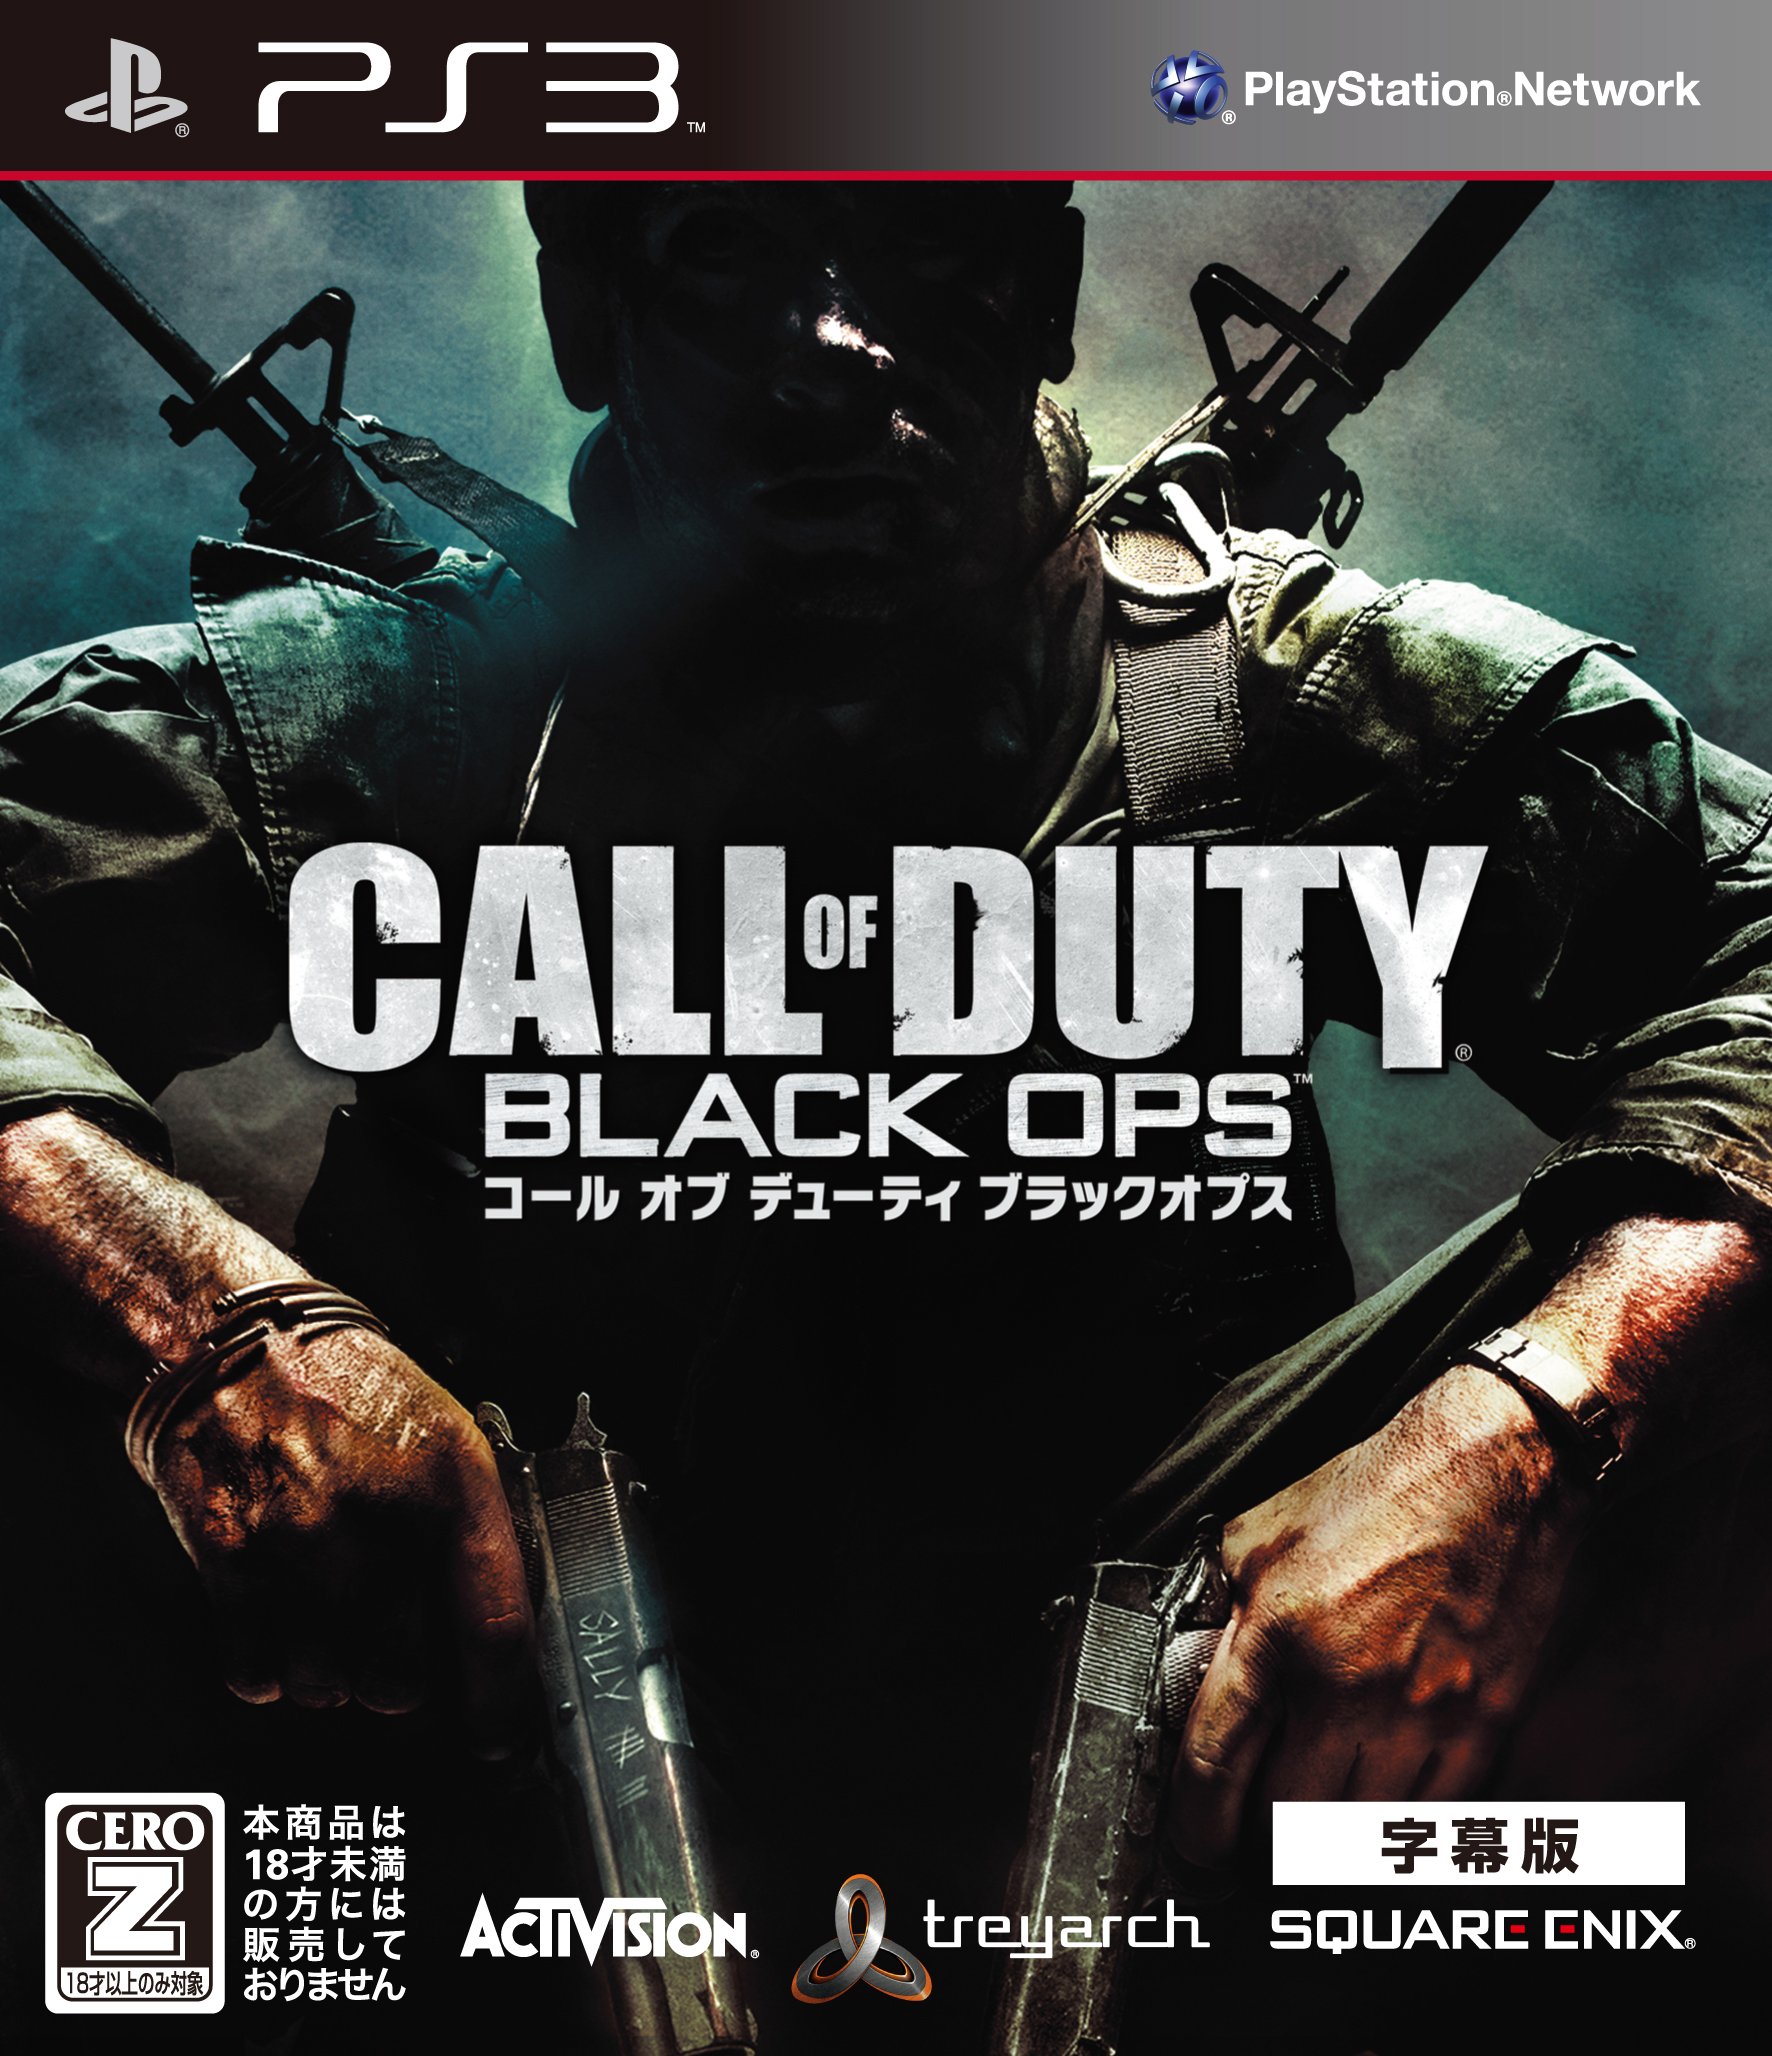 Call of Duty: Black Ops (Subtitled Edition) [Japan Import]